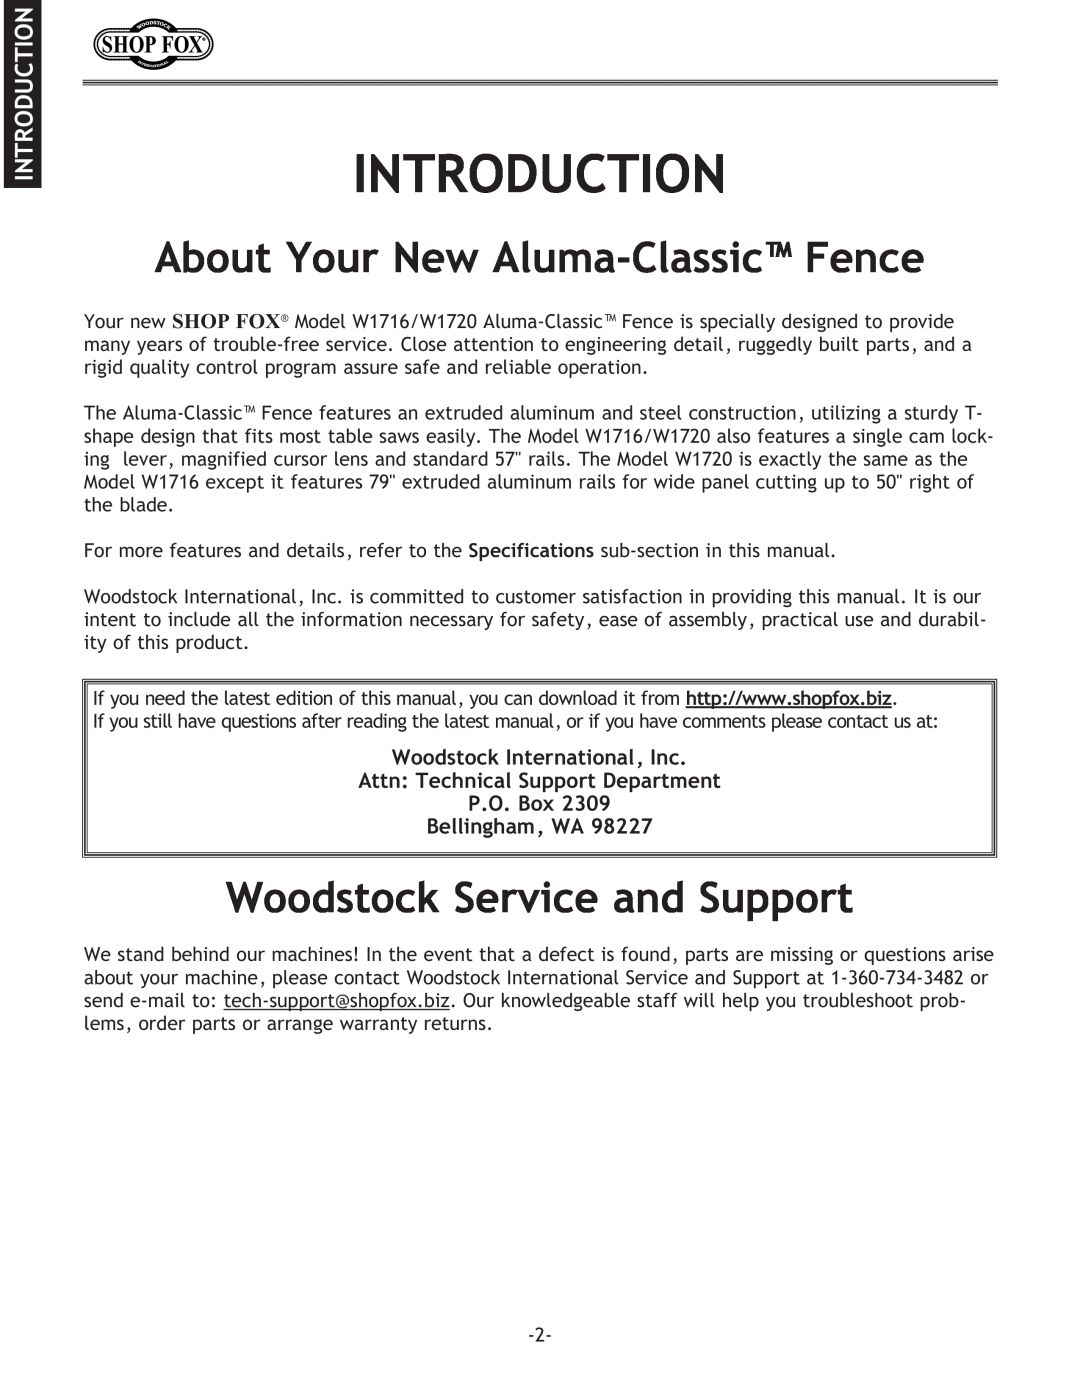 Woodstock W1716 Introduction, About Your New Aluma-ClassicFence, Woodstock Service and Support, Bellingham, WA 